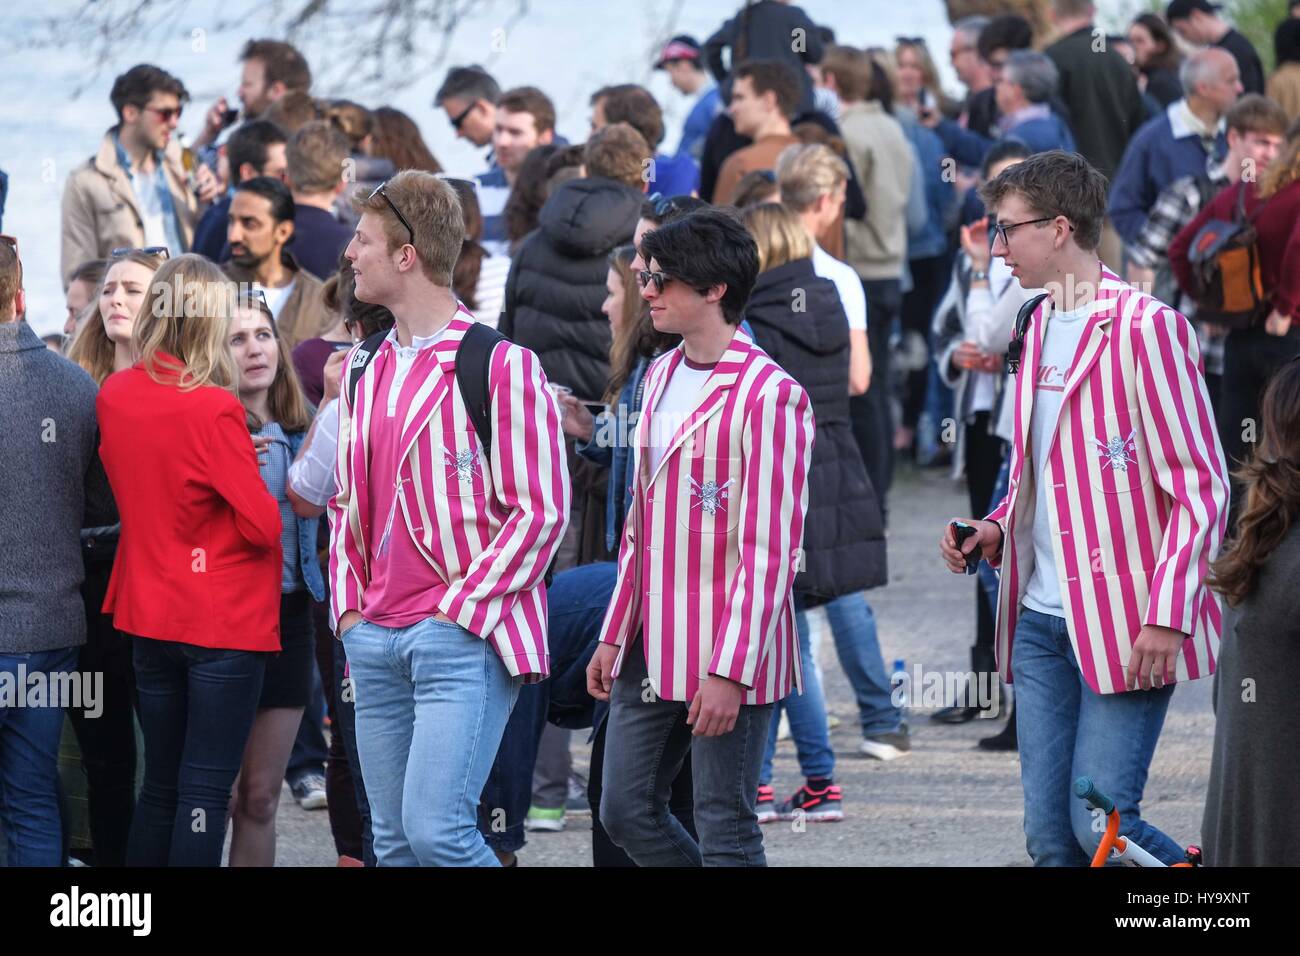 London, UK. 2nd Apr, 2017. Spectators gather along the race route.  Credit: claire doherty/Alamy Live News Stock Photo